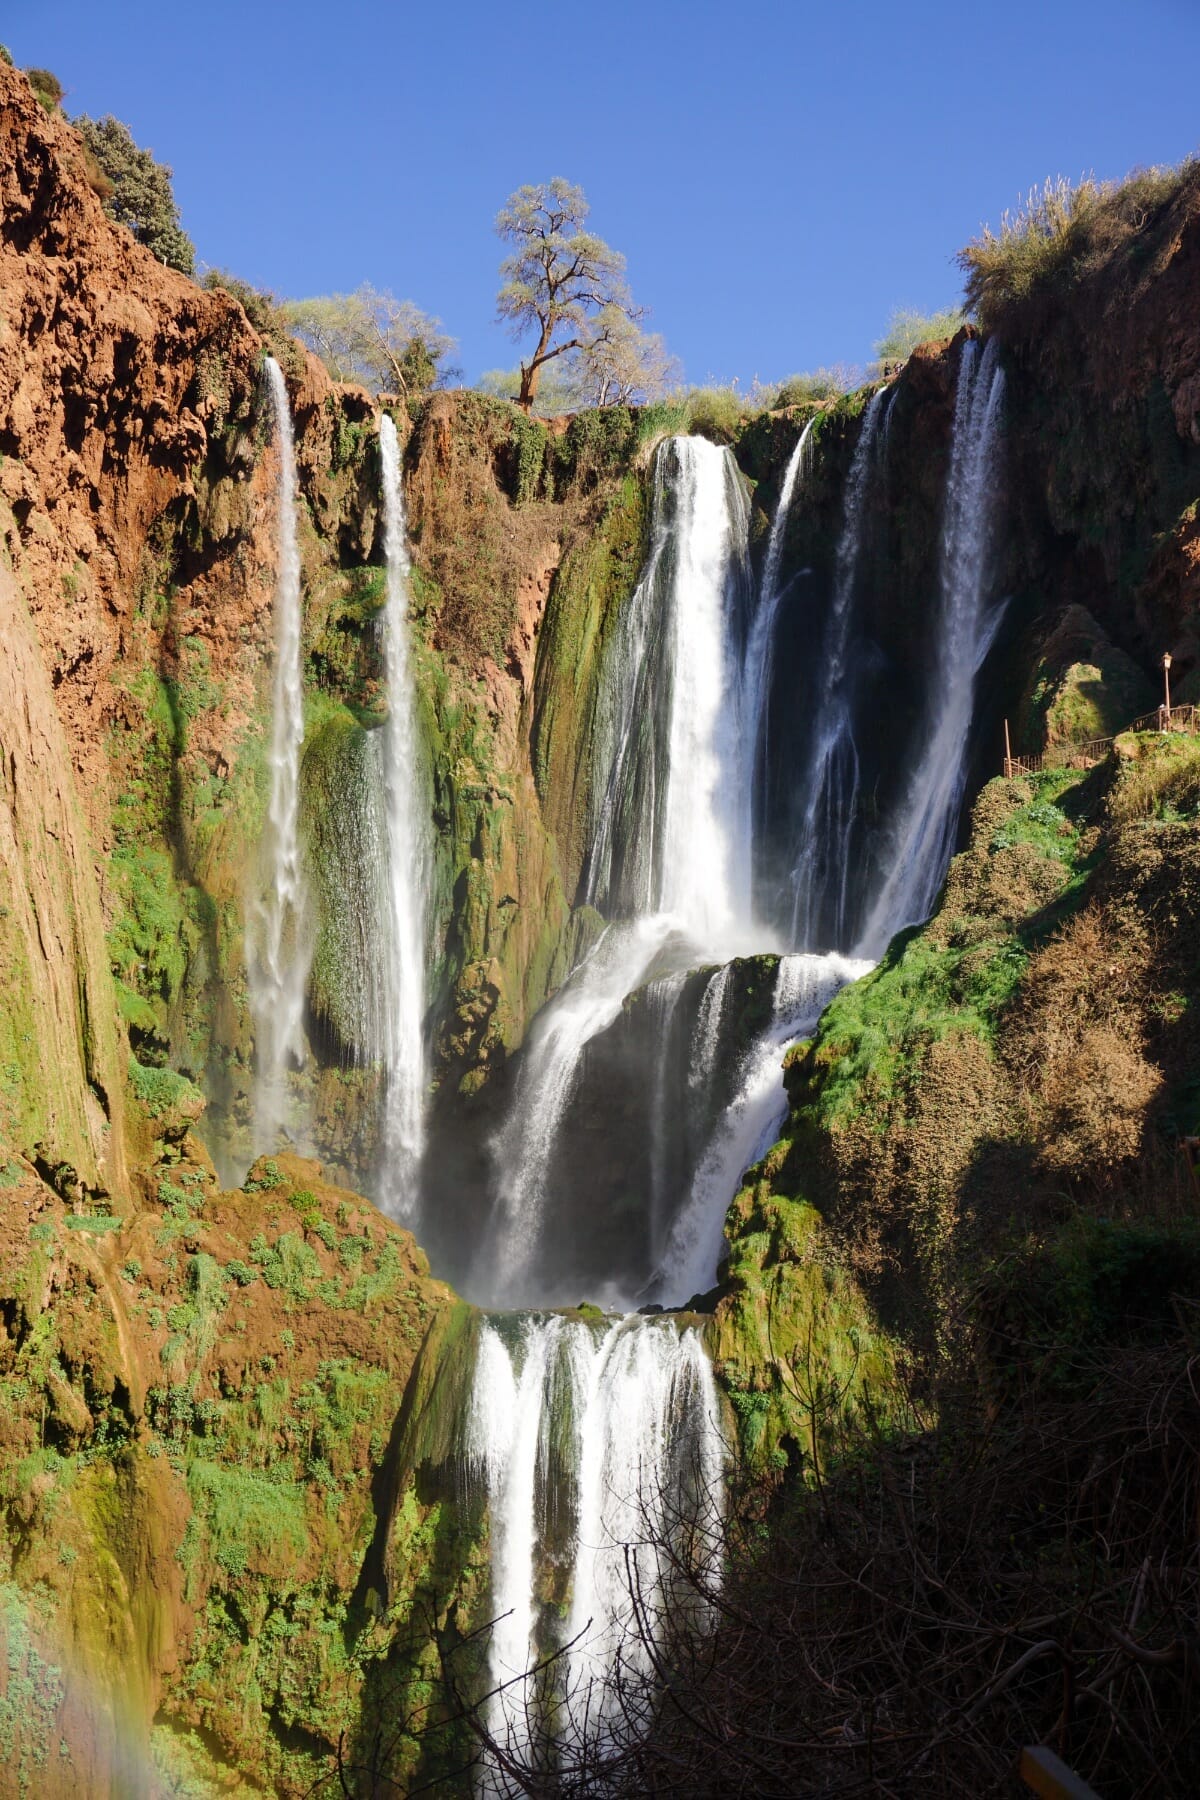 Ouzoud waterfalls in Morocco.